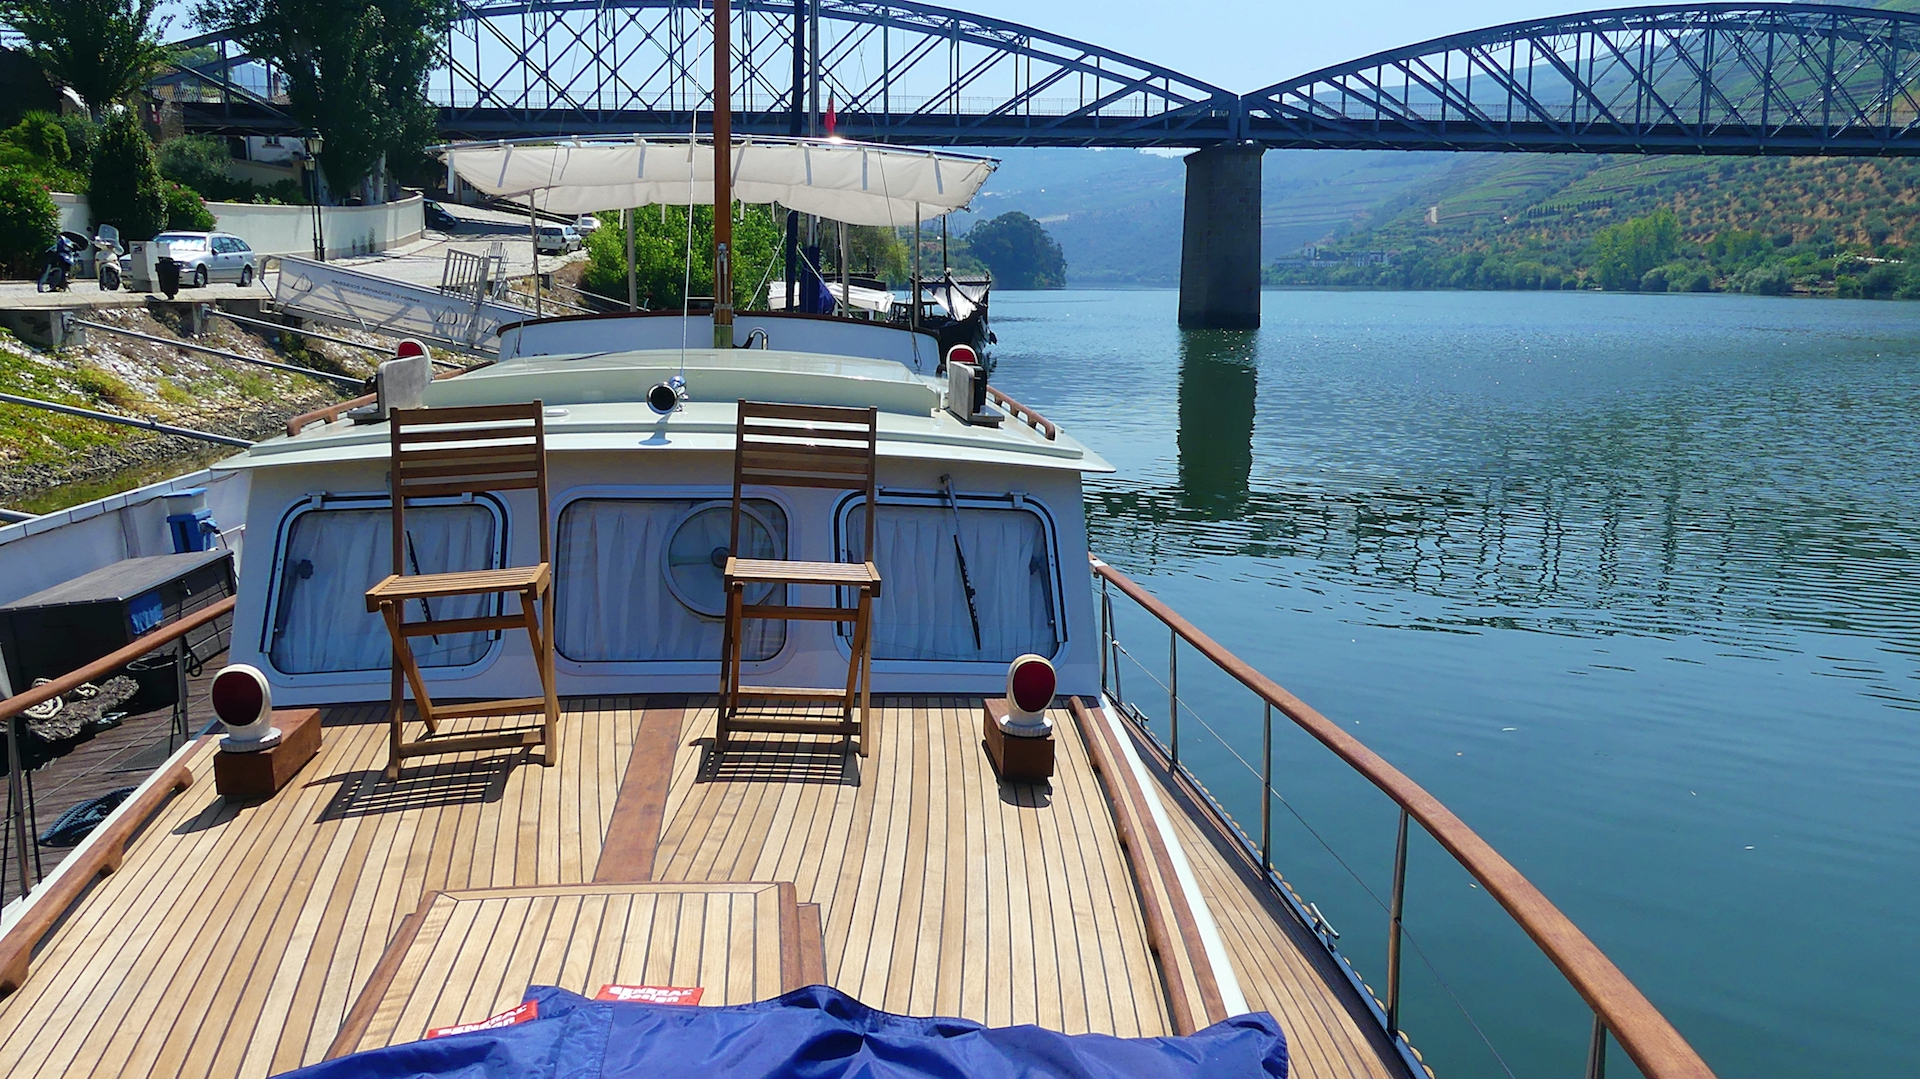 Enjoy the view from your boats in the Douro